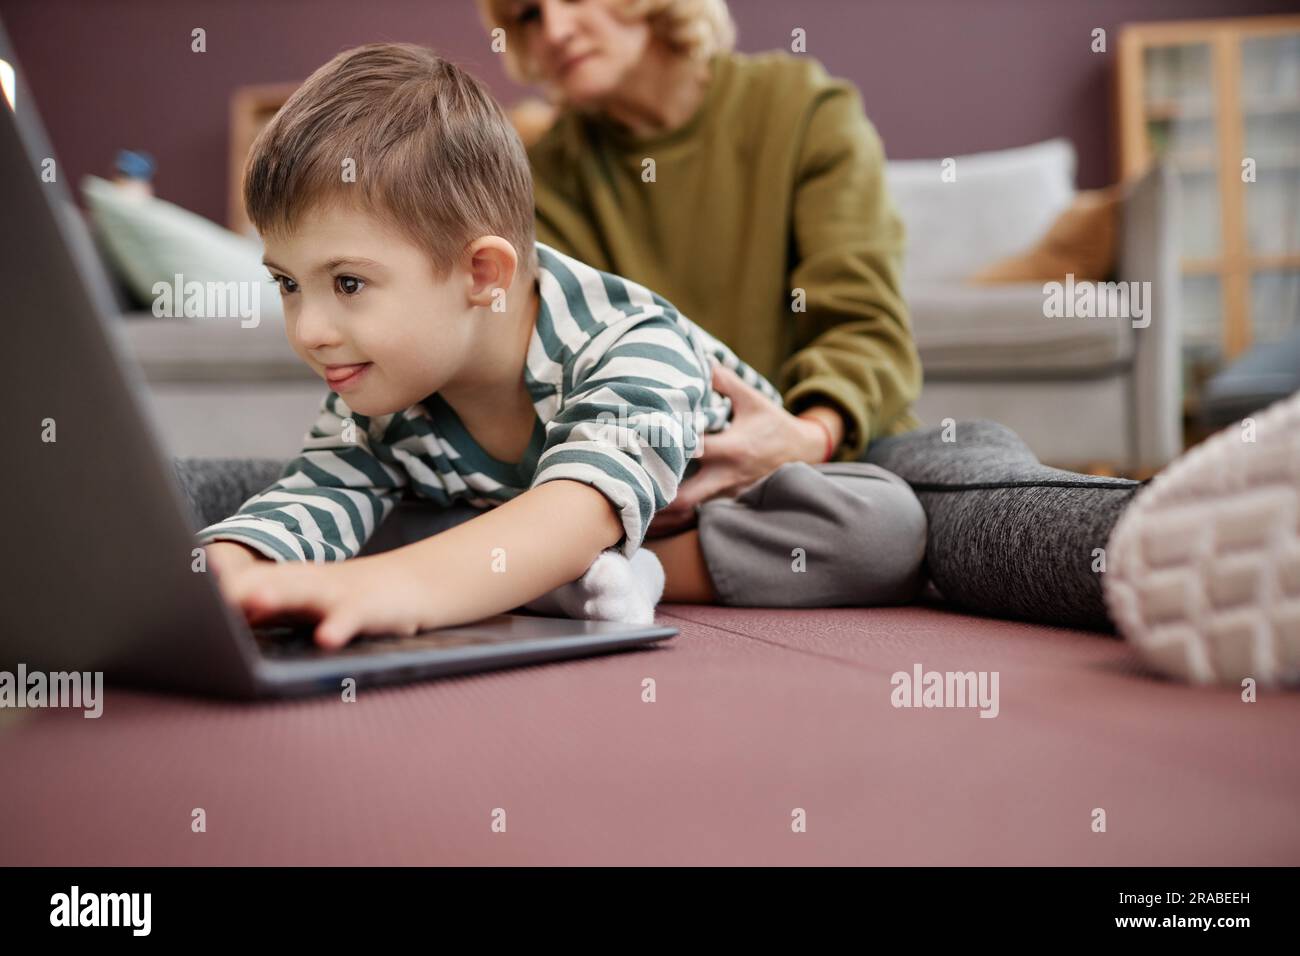 Closeup of curious excited boy with down syndrome using laptop on floor at home, copy space Stock Photo